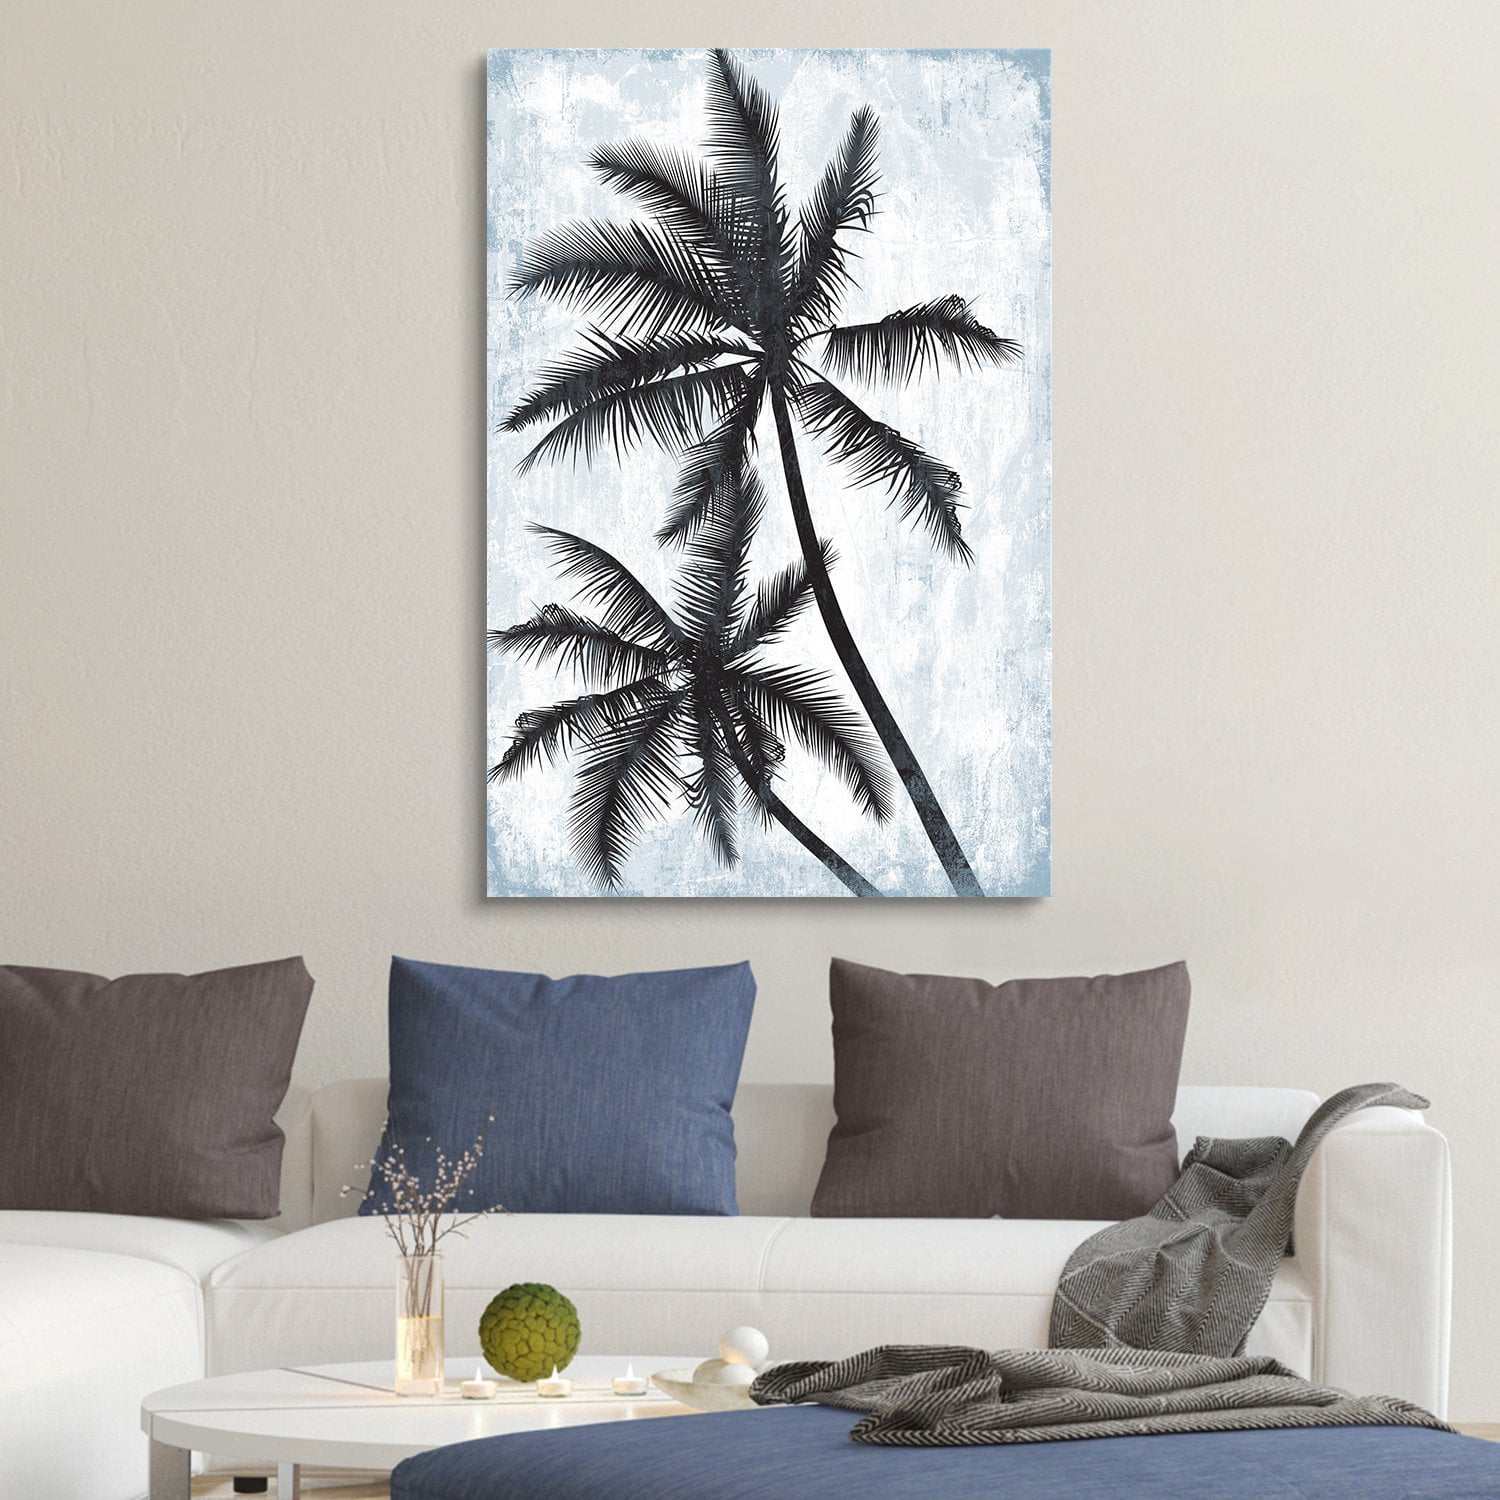 Wall26 Palm Tree Wall Art Tropical Canvas Wall Art Landscape Prints for